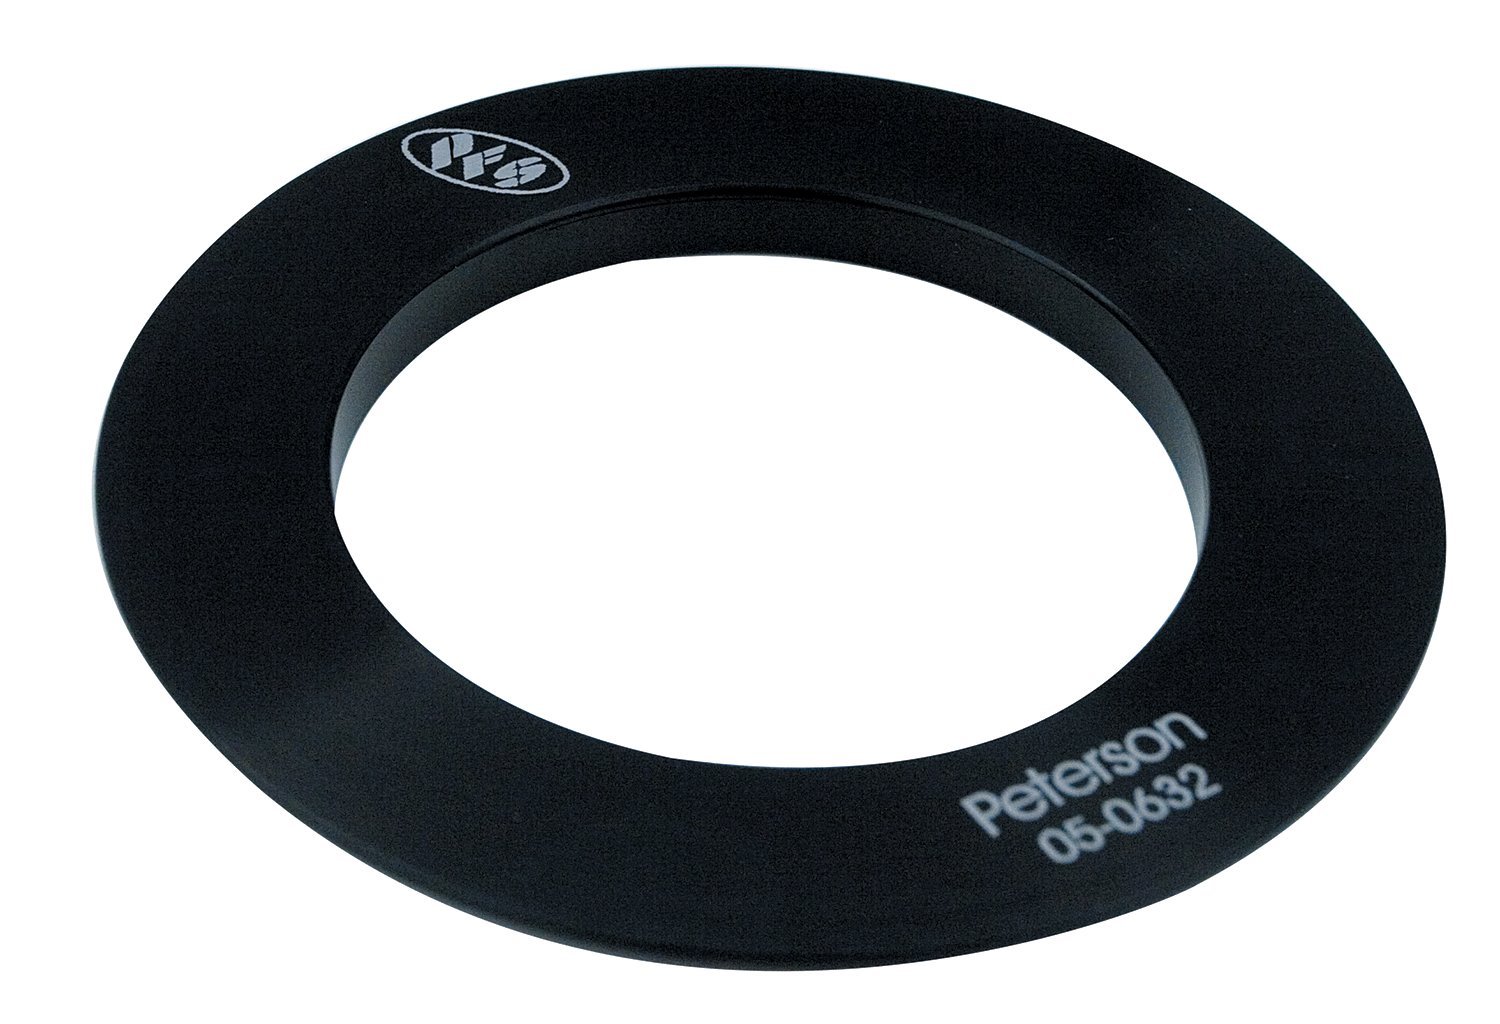 Pulley Flange Fits 615-05-1349, 615-06-1349 Designed for Use With Peterson Pulleys Only